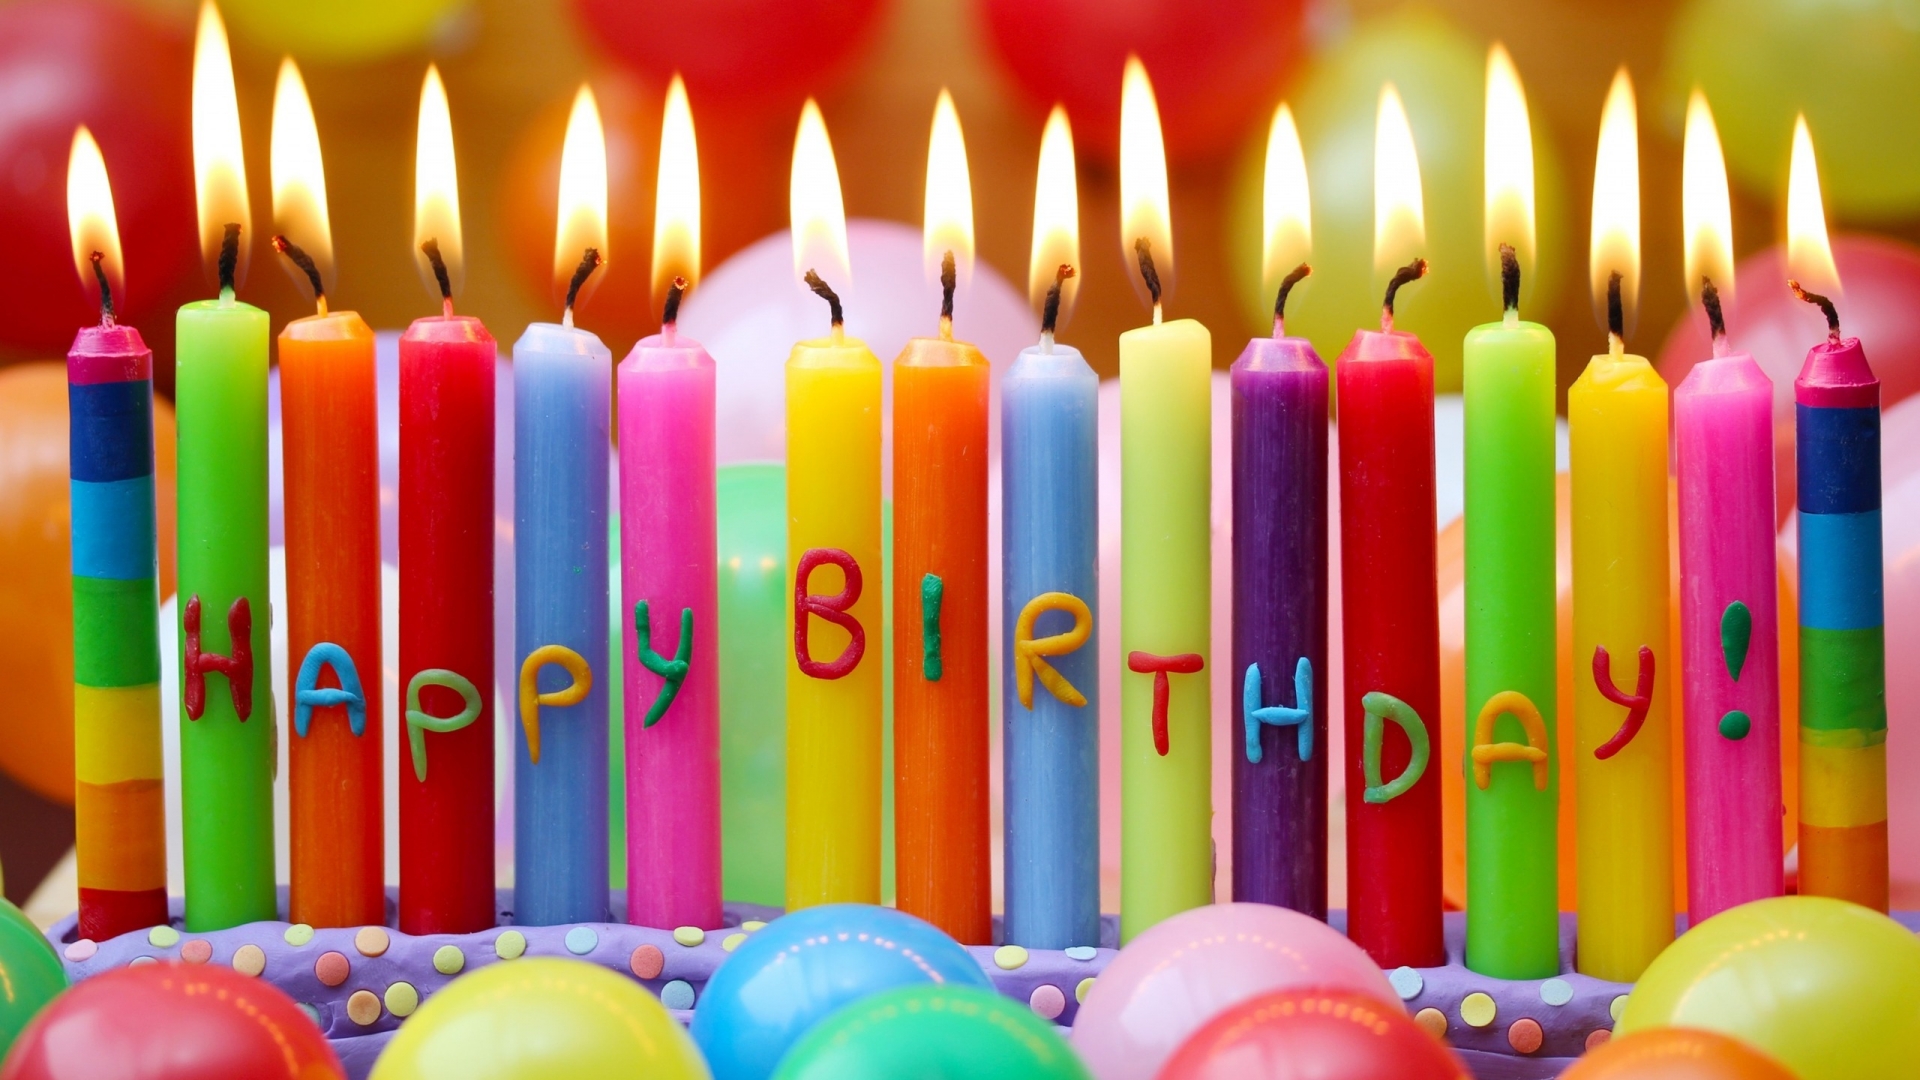 Happy Birthday Candles for 1920 x 1080 HDTV 1080p resolution